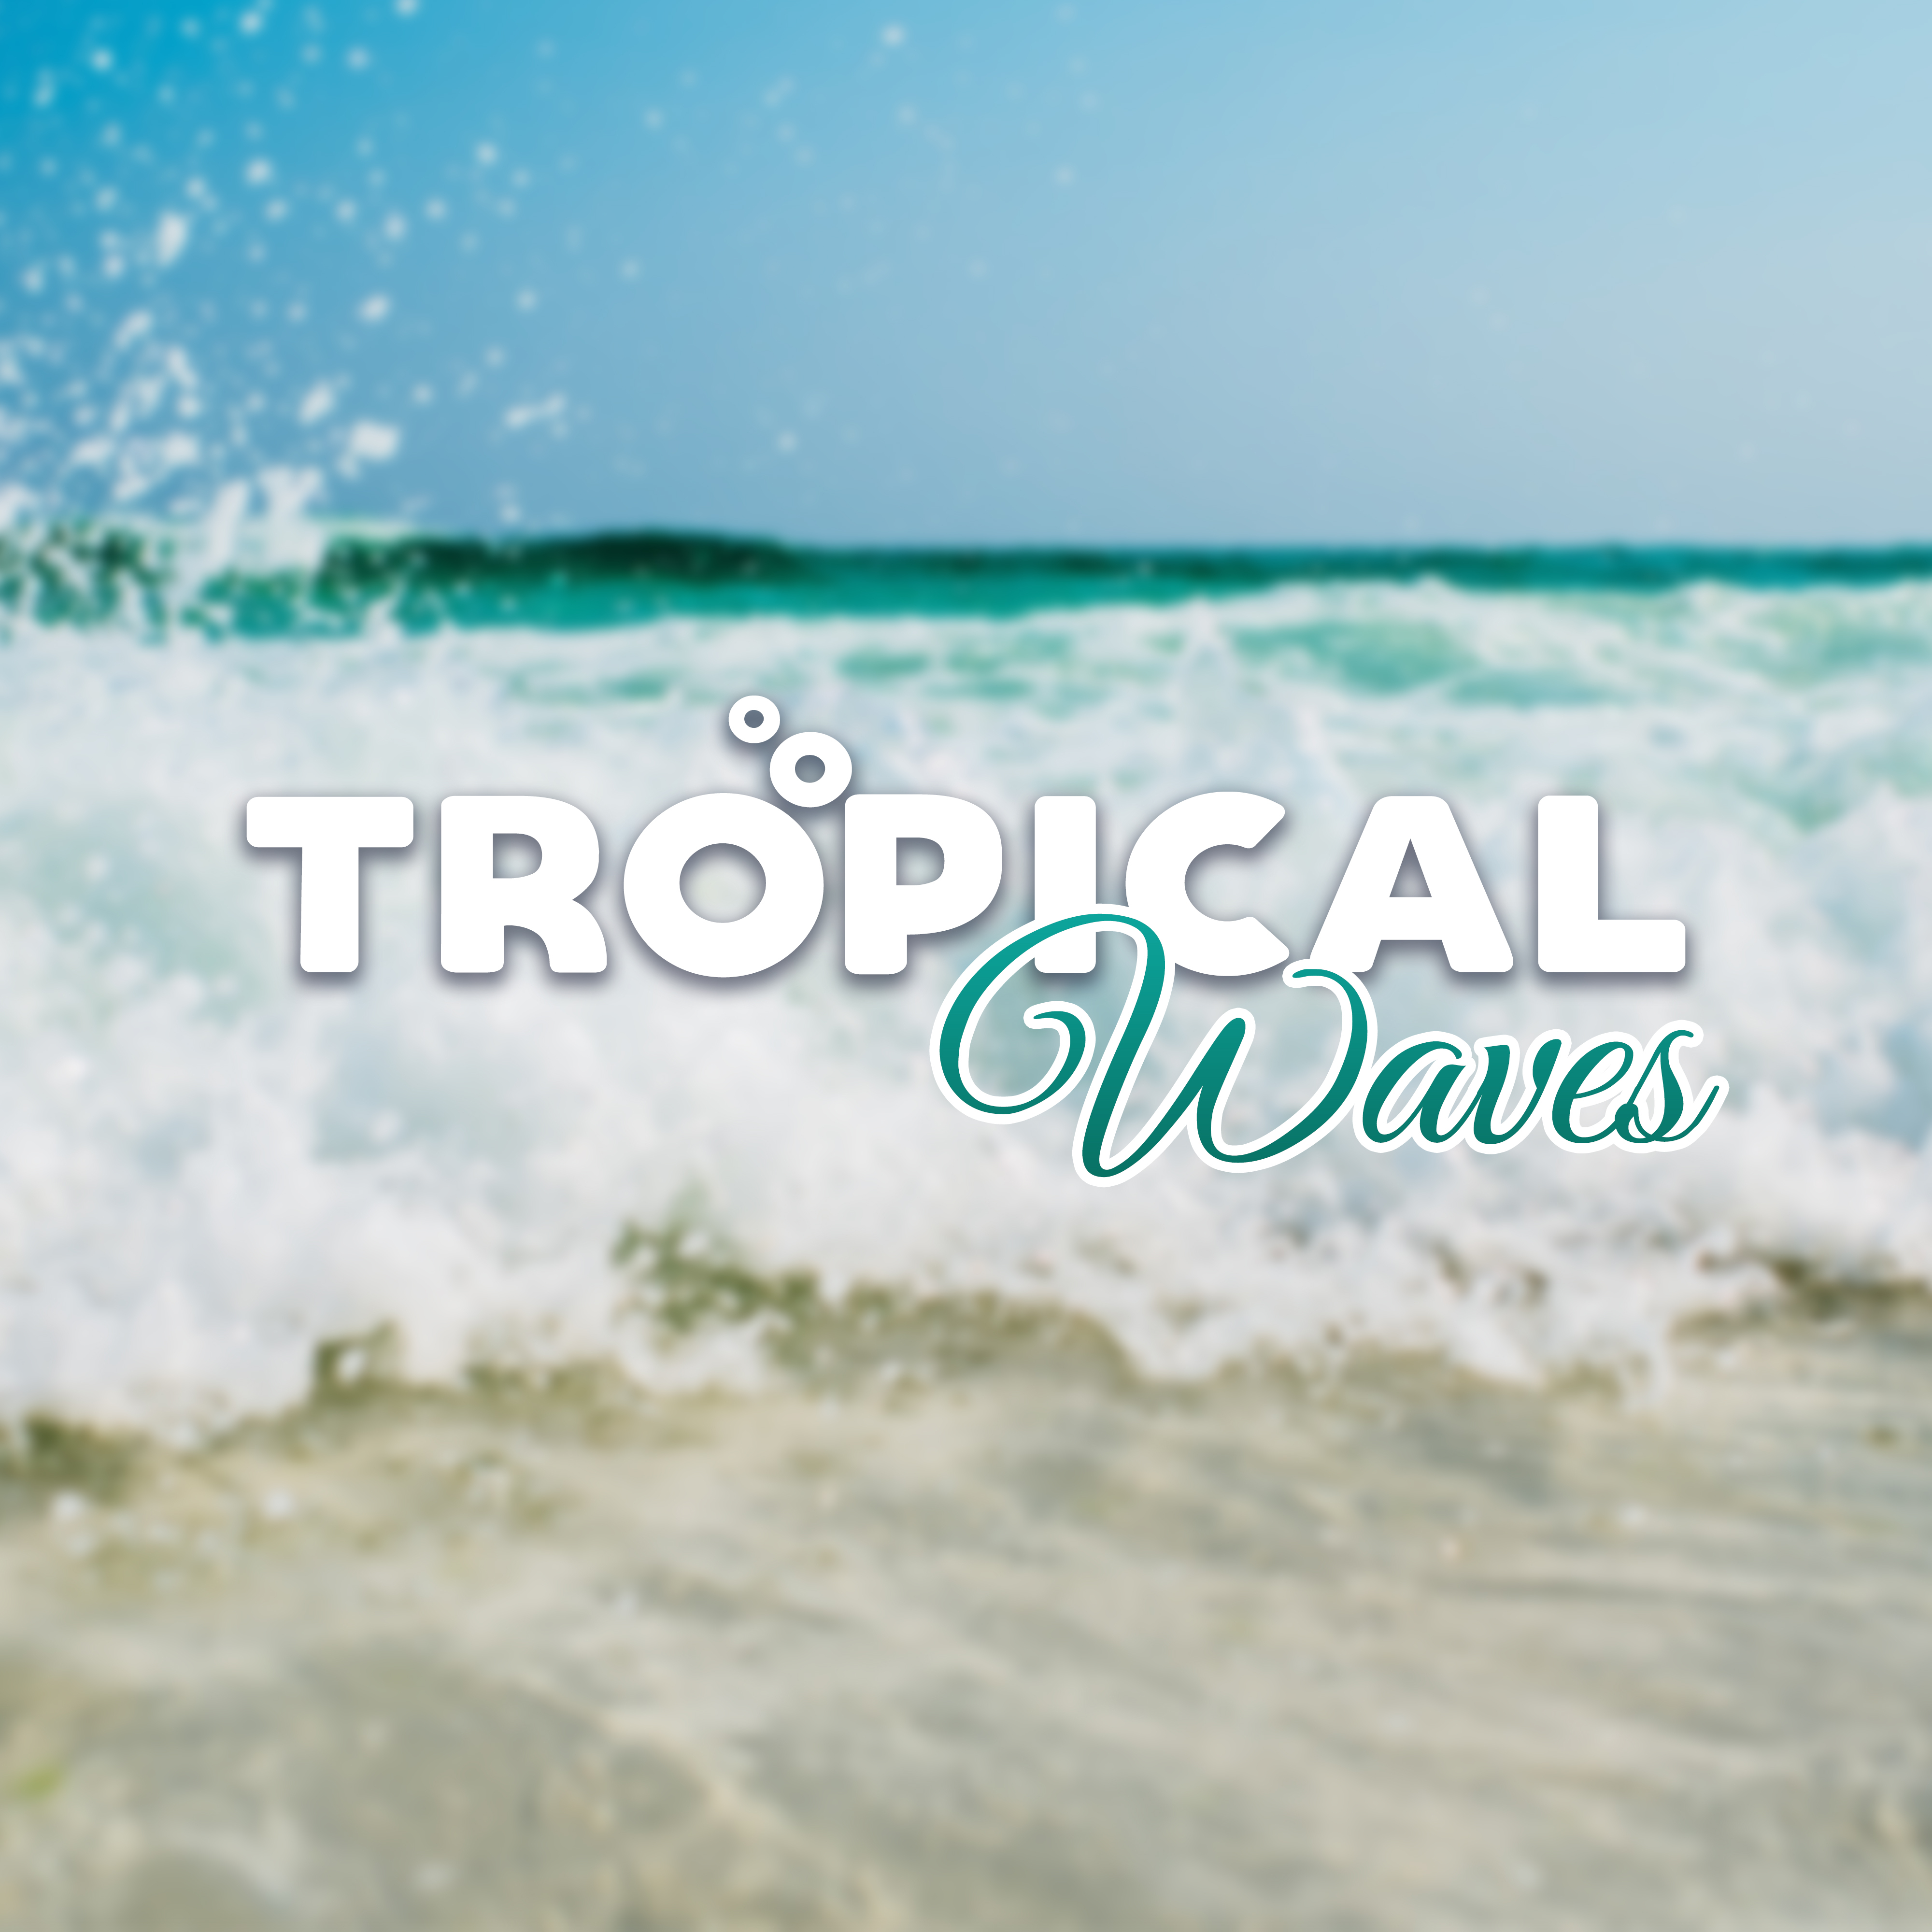 Tropical Waves – Chill Out 2017, Relax & Chill, Positive Vibes, Summer Hits